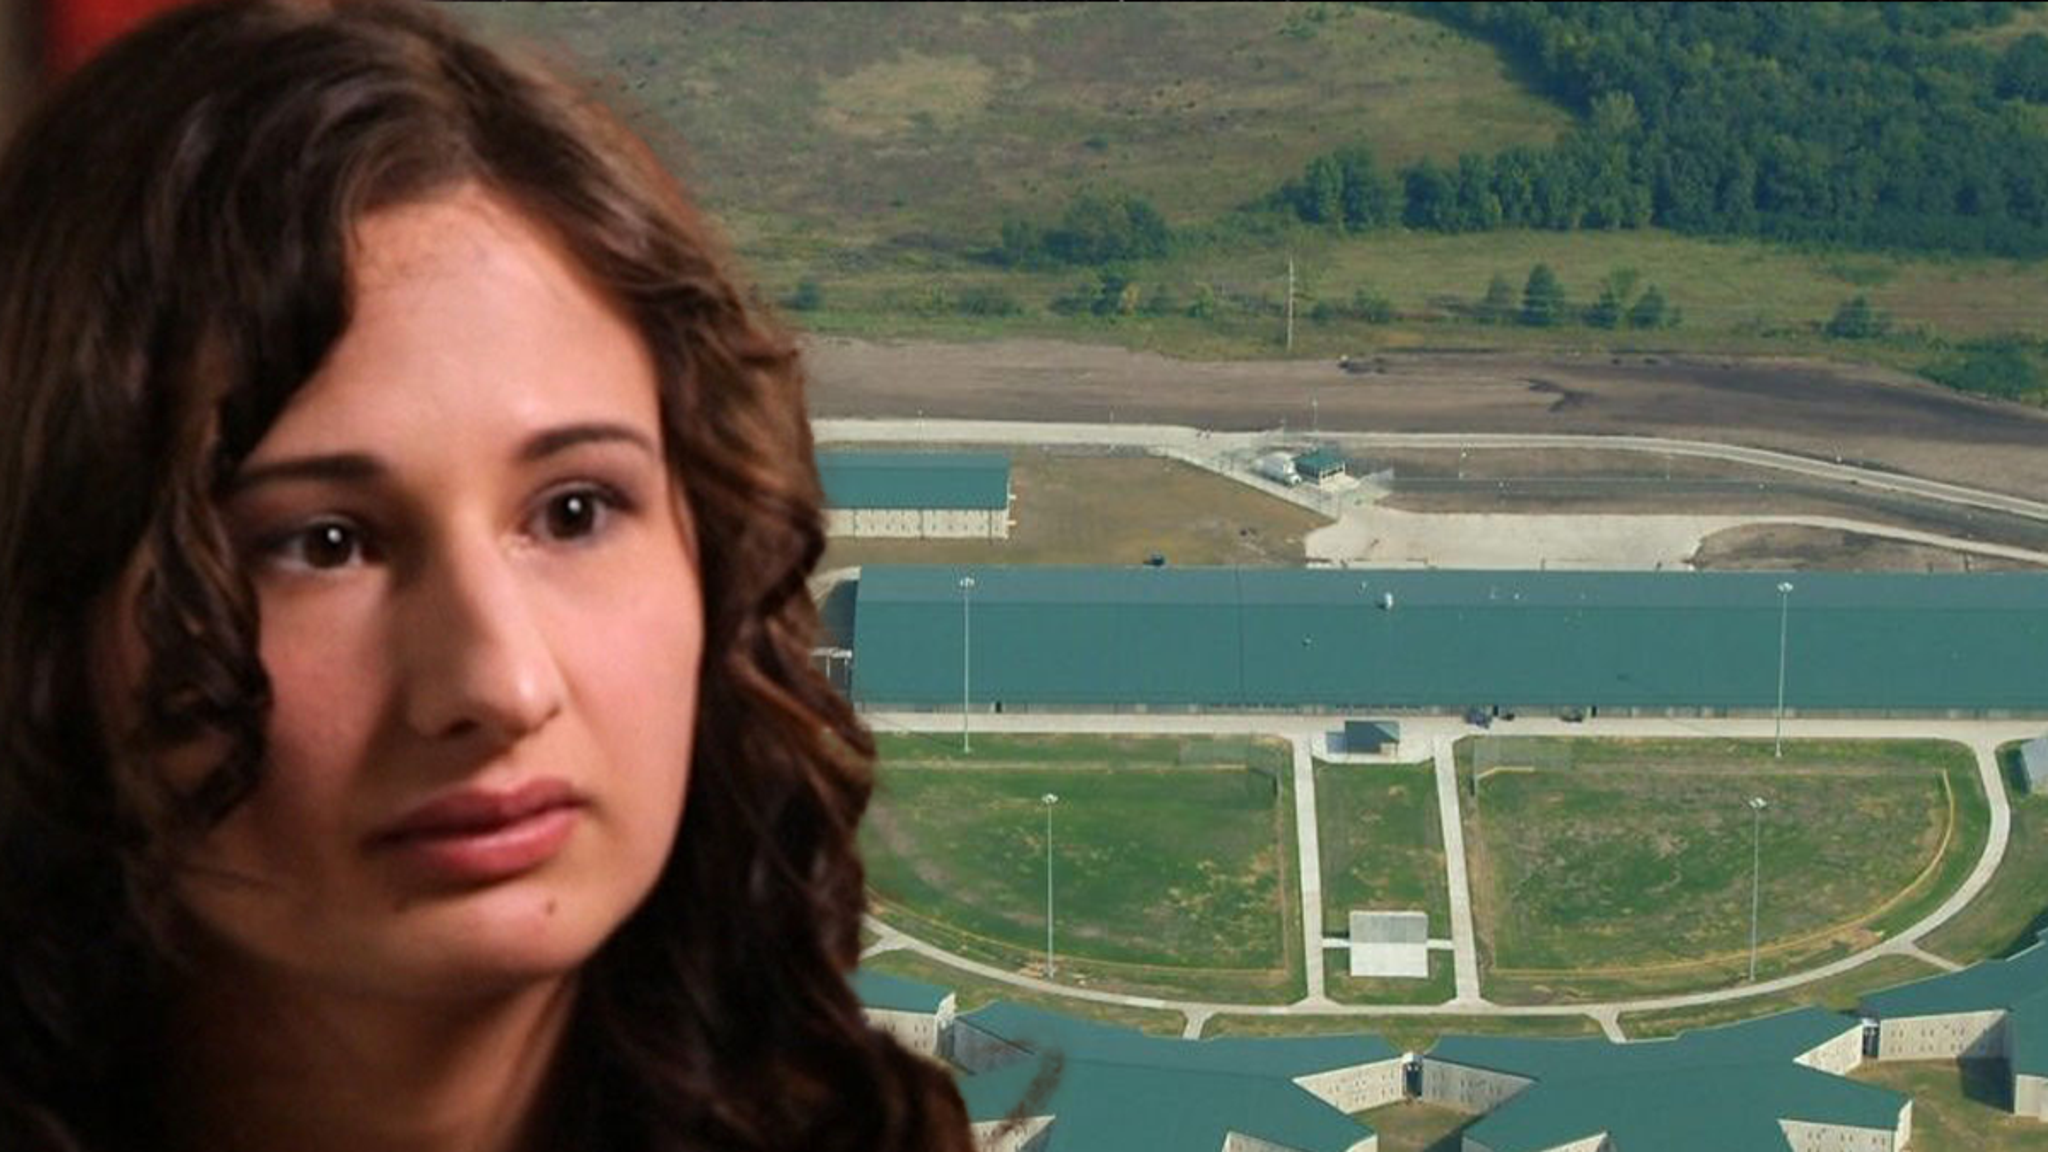 The Process of Gypsy Rose Blanchard’s Prison Release to Remain Secretive